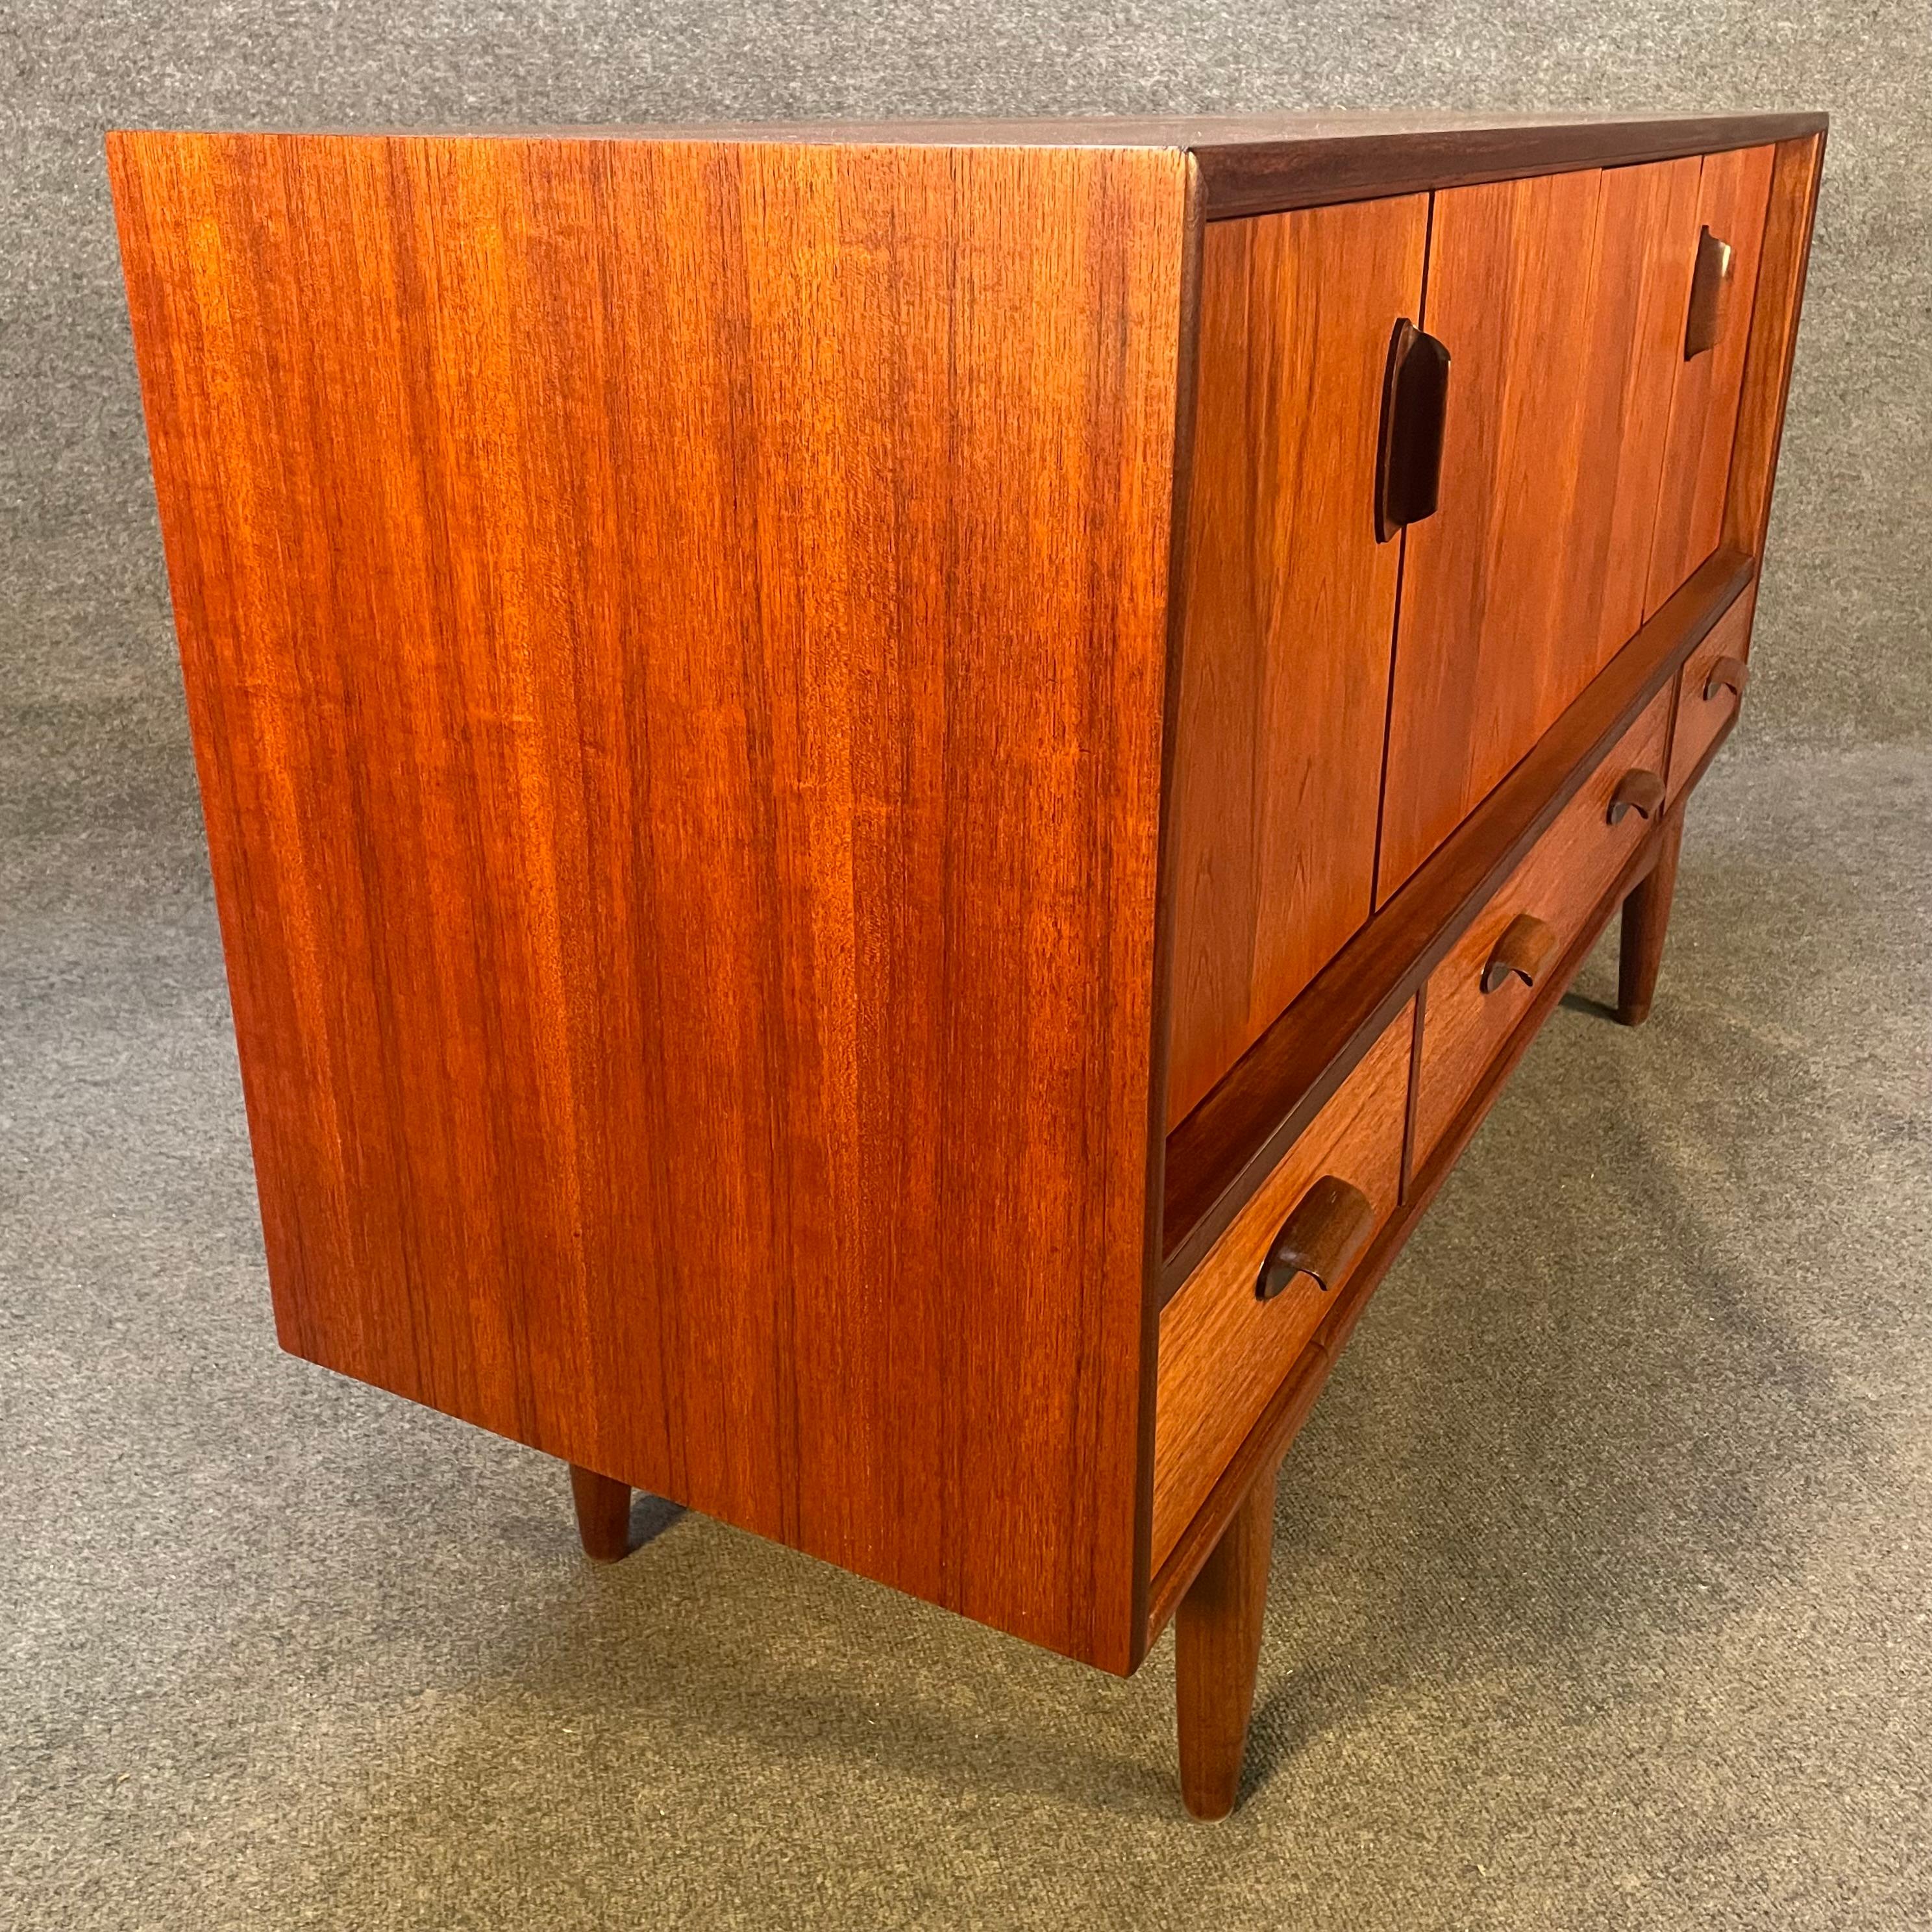 Vintage British Mid-Century Modern Teak Compact Credenza by G Plan In Good Condition For Sale In San Marcos, CA